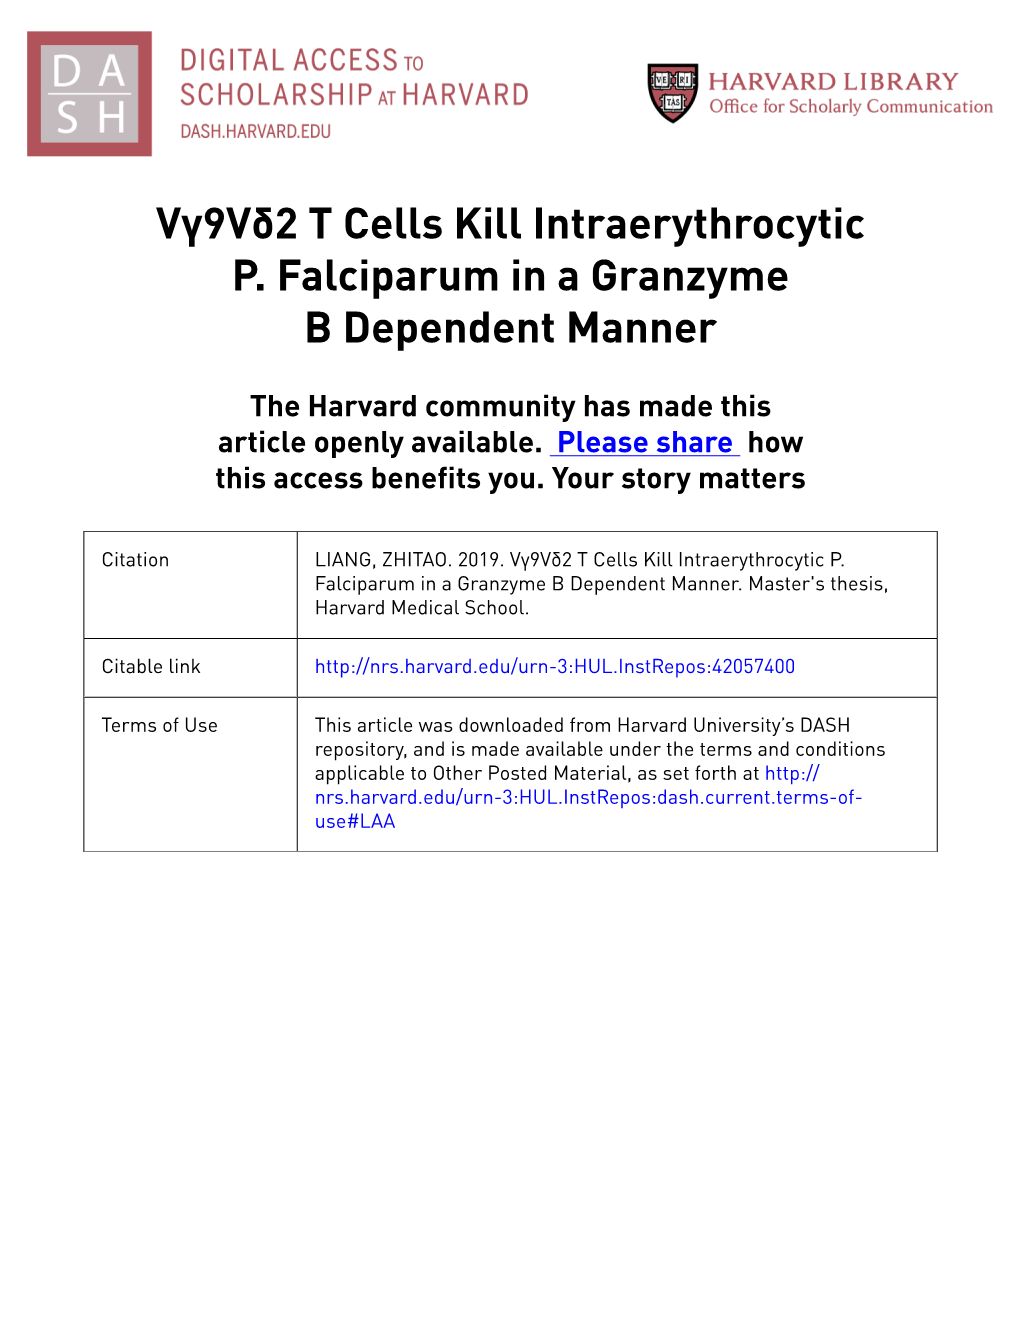 Vγ9vδ2 T Cells Kill Intraerythrocytic P. Falciparum in a Granzyme B Dependent Manner